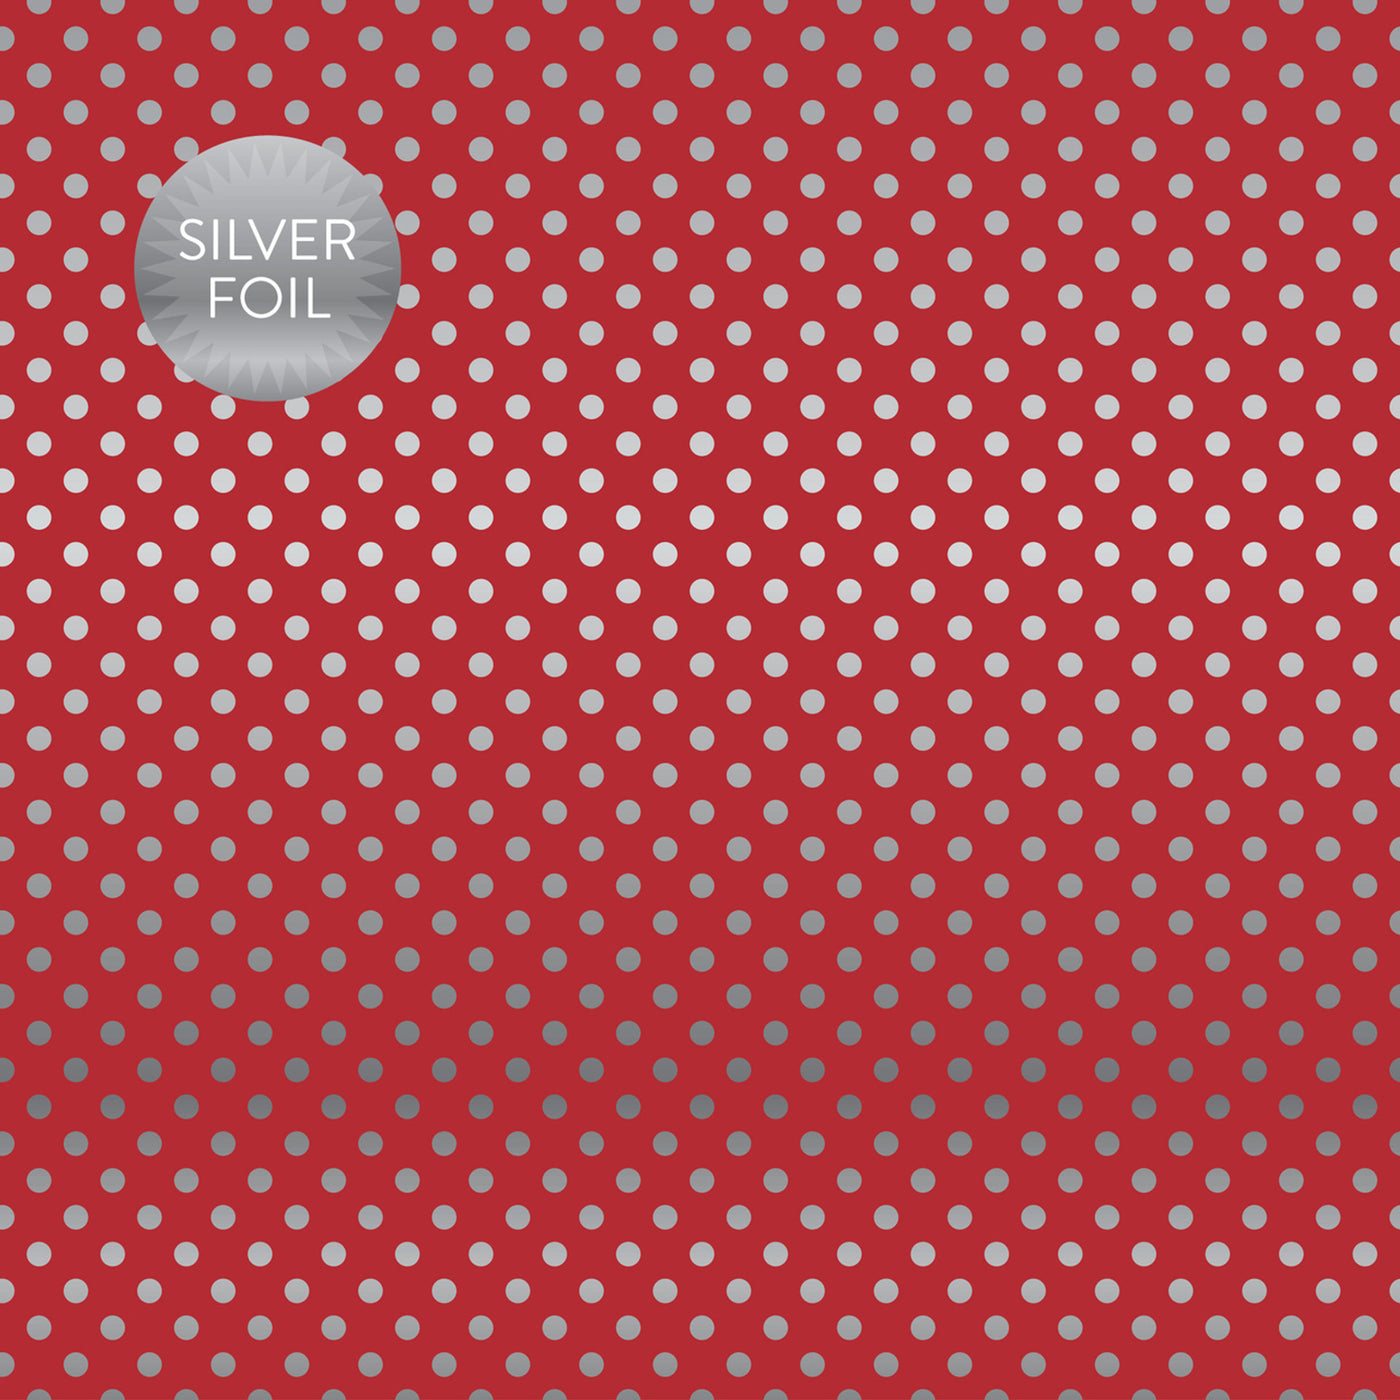 Silver foil dots on red 12x12 cardstock, plain red reverse, from Dots & Stripes Collection by Carta Bella Paper.